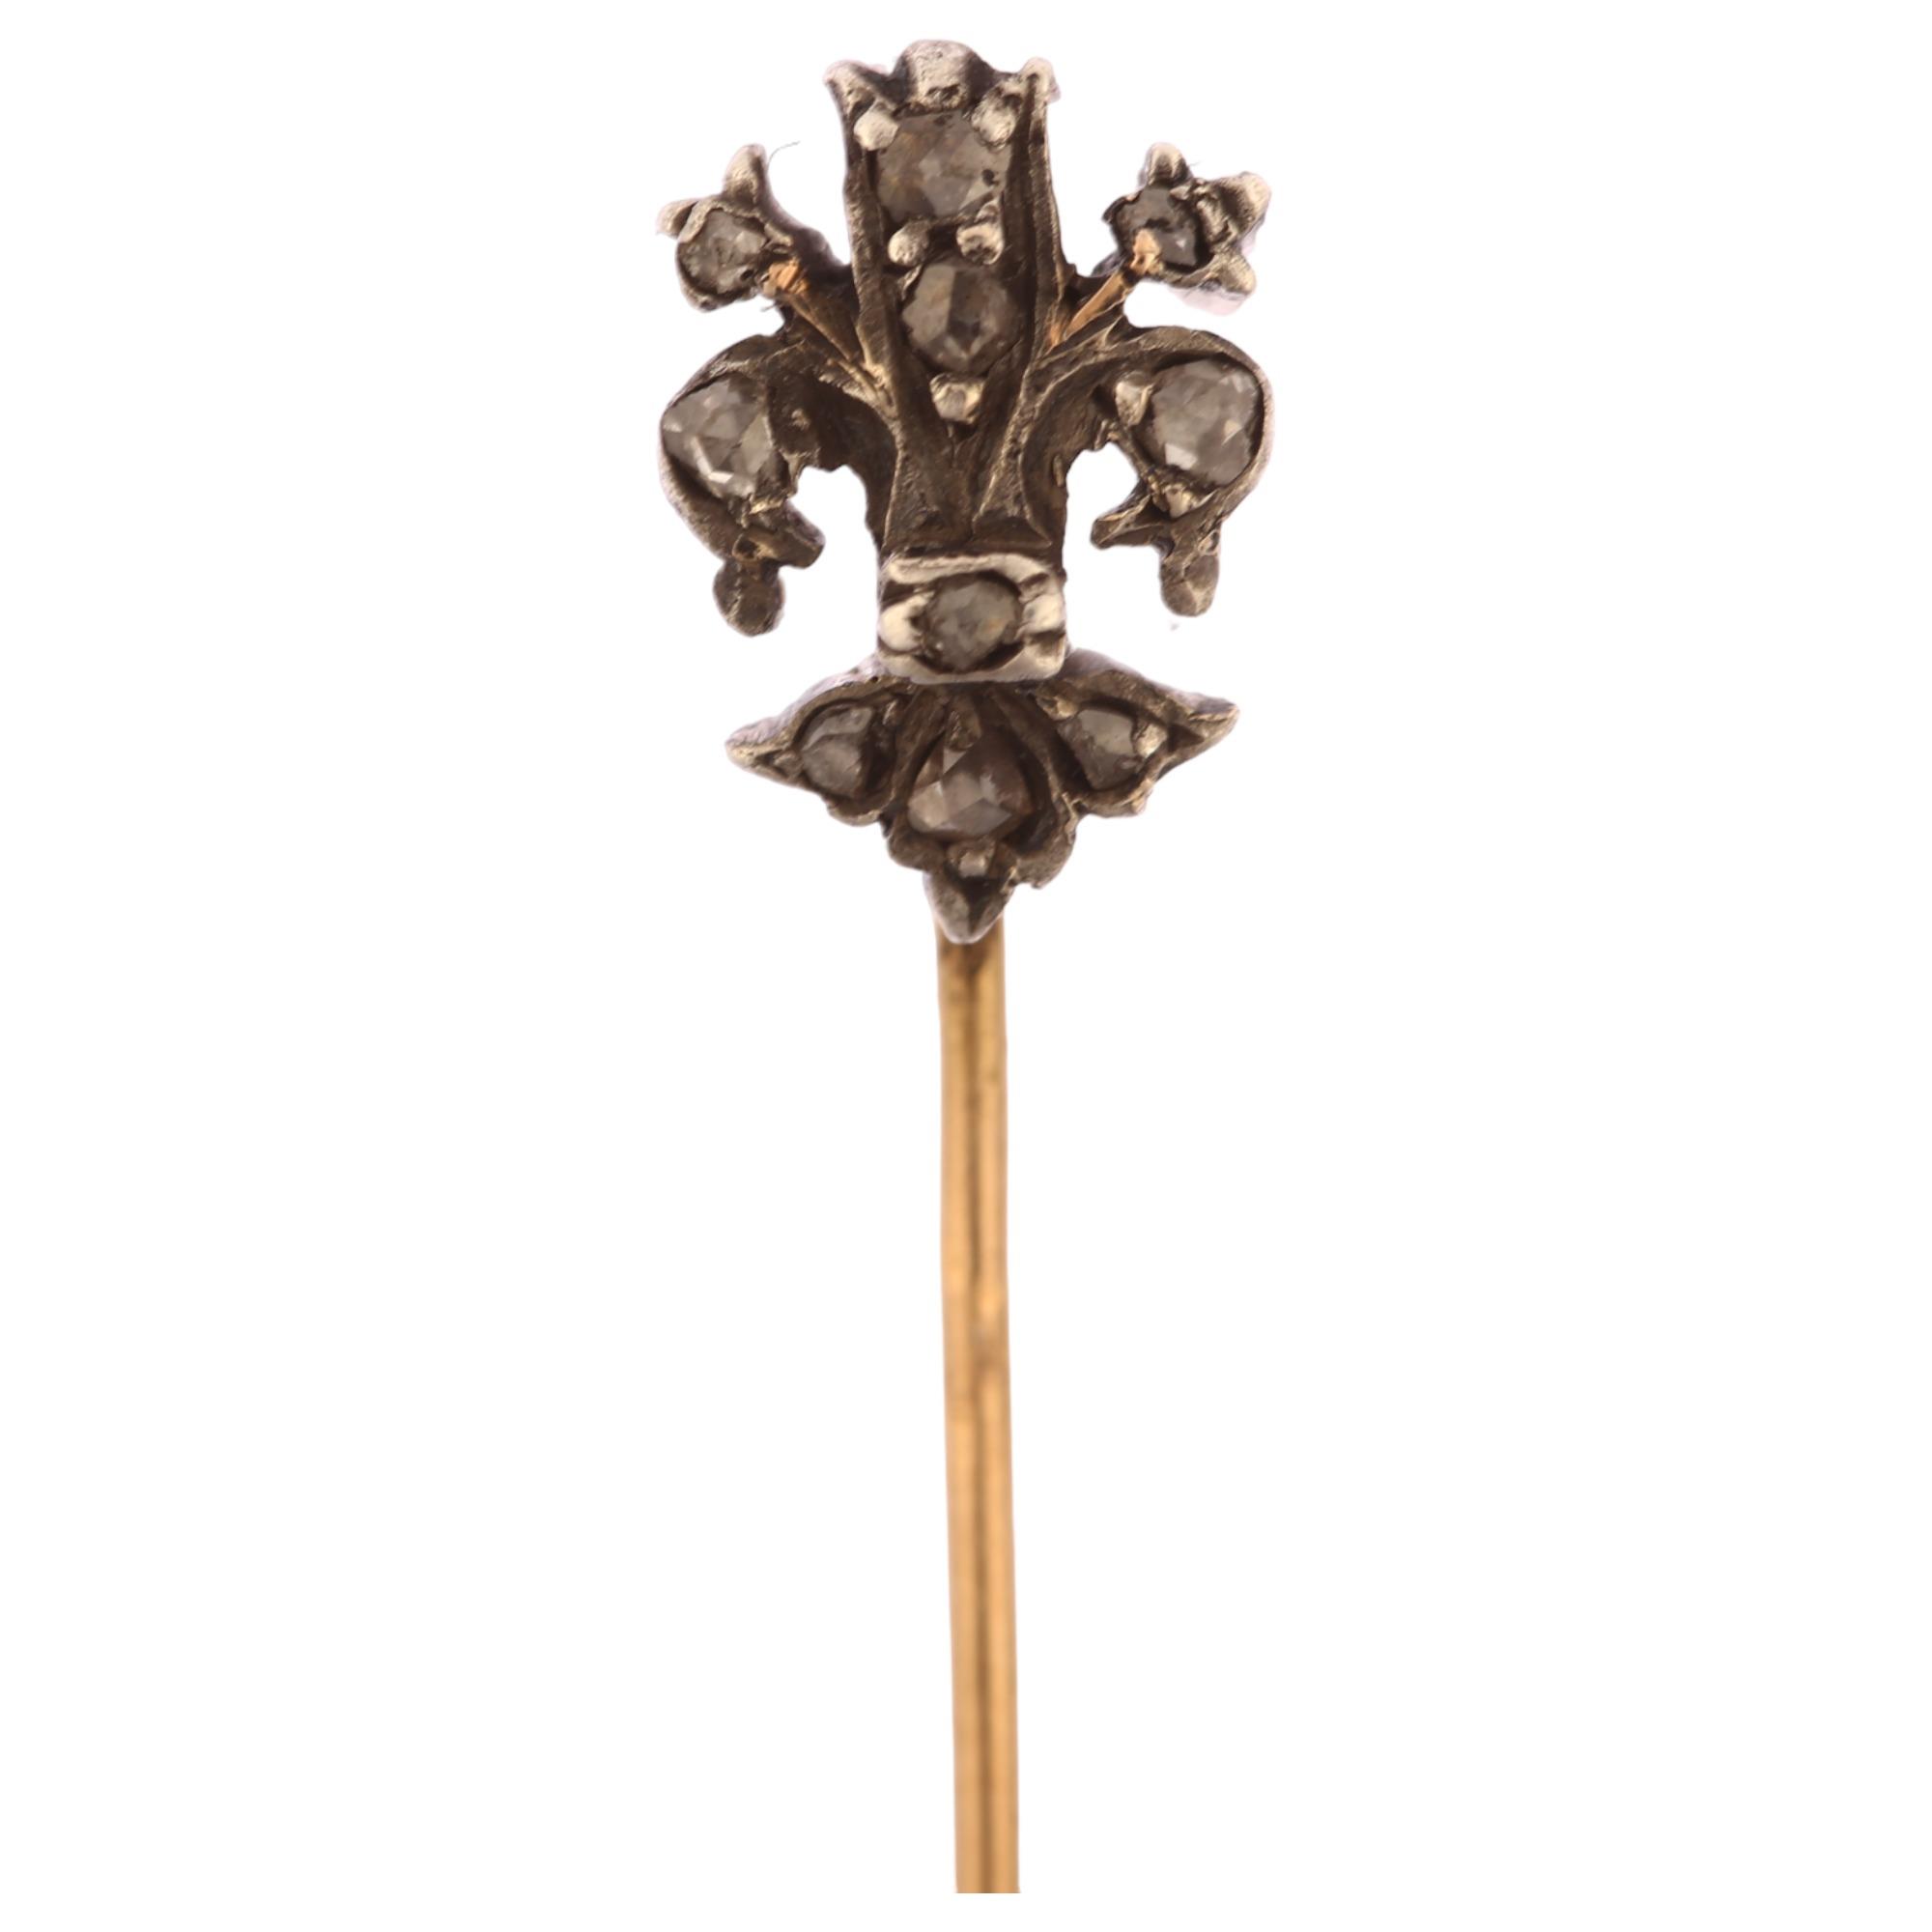 A 19th century diamond fleur-de-lis stickpin, unmarked gold and silver settings with rose-cut